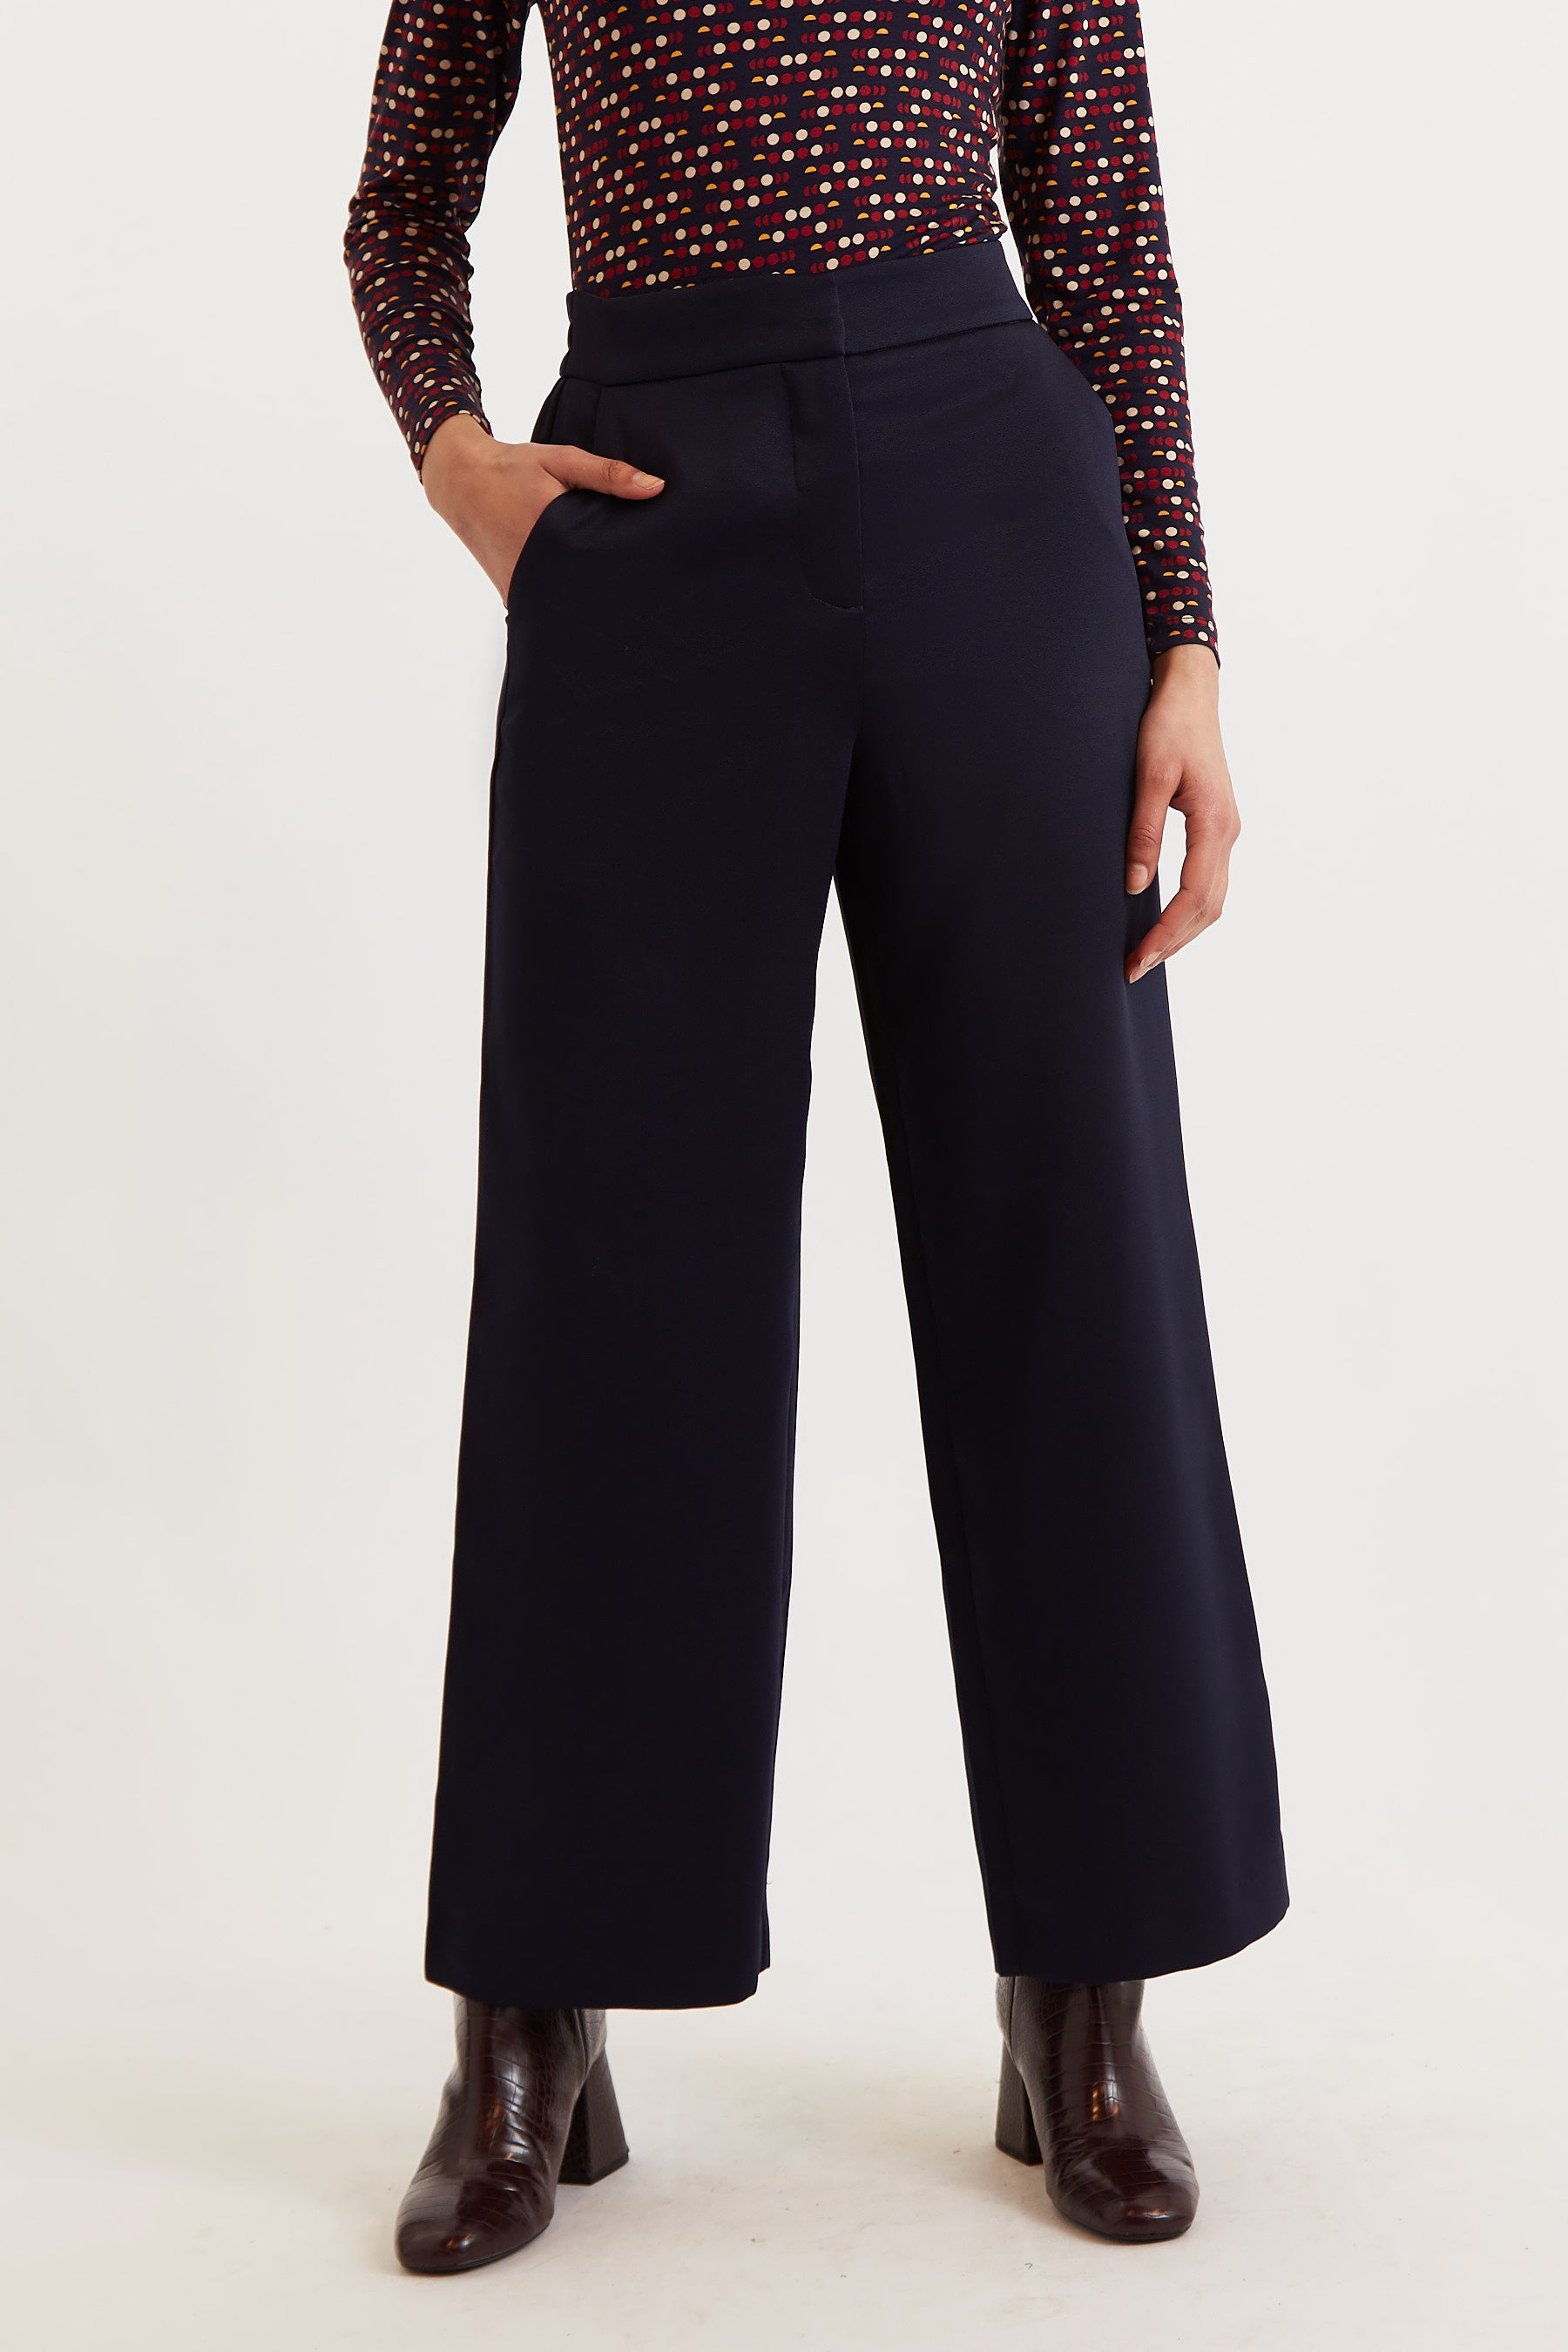 Tilde Sustainable Satin Back Crepe Wide Leg Trousers - Navy product